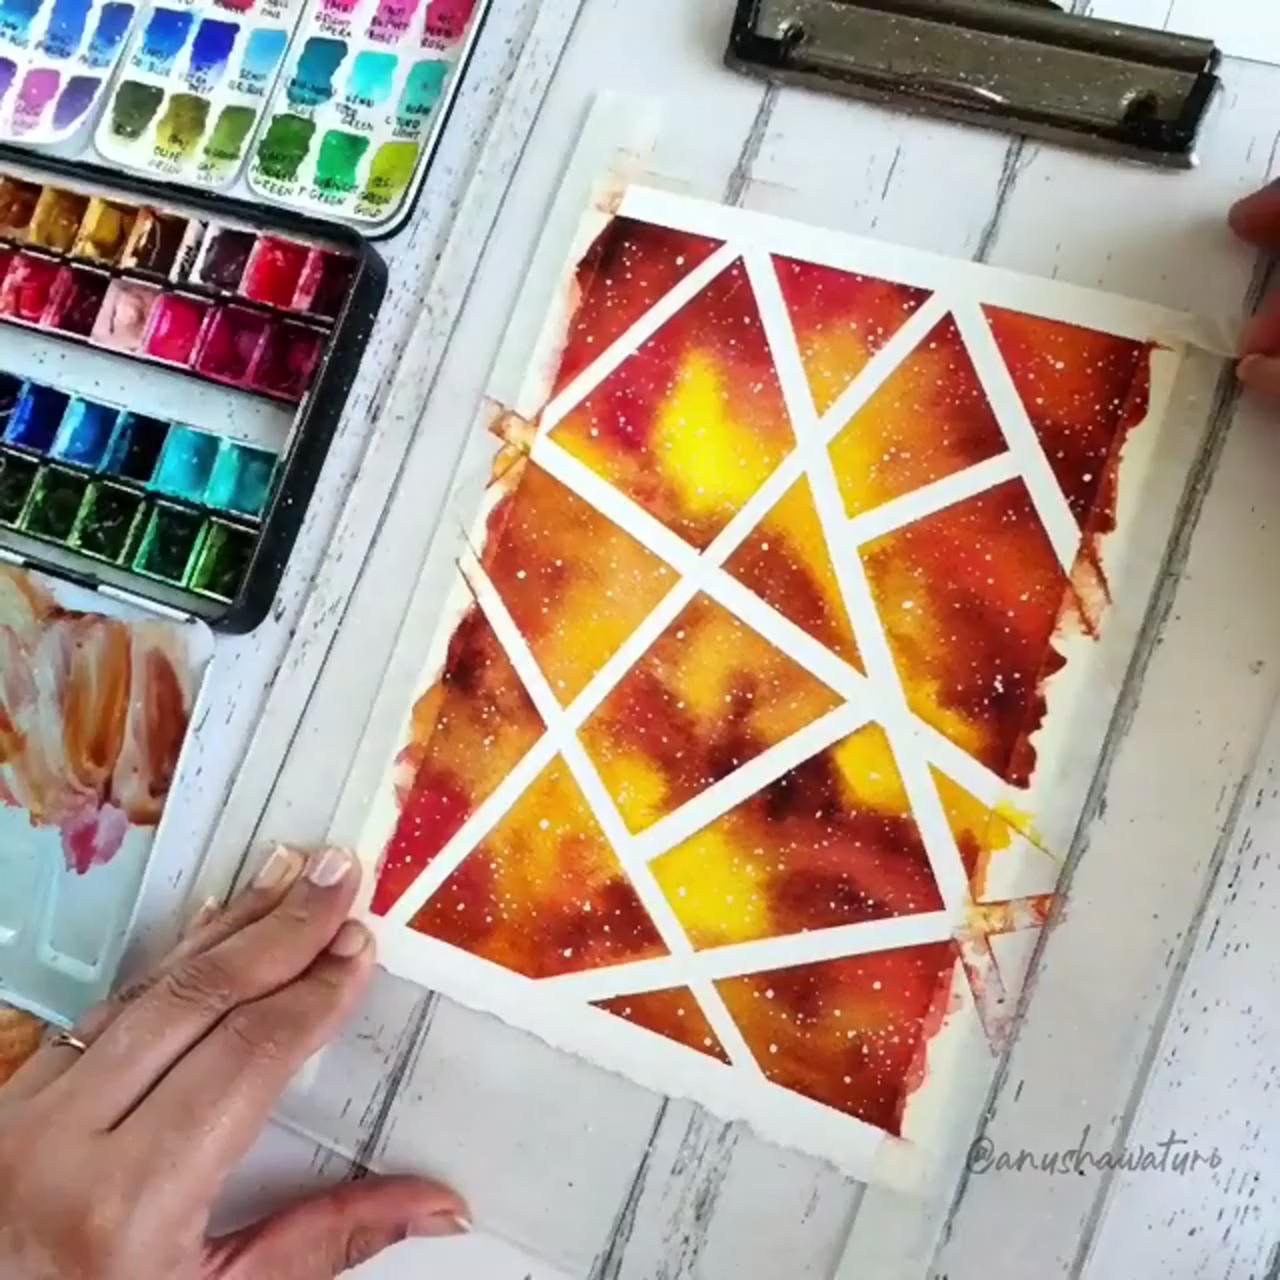 Beginner watercolor tutorial: how to paint with watercolors | canvas painting designs